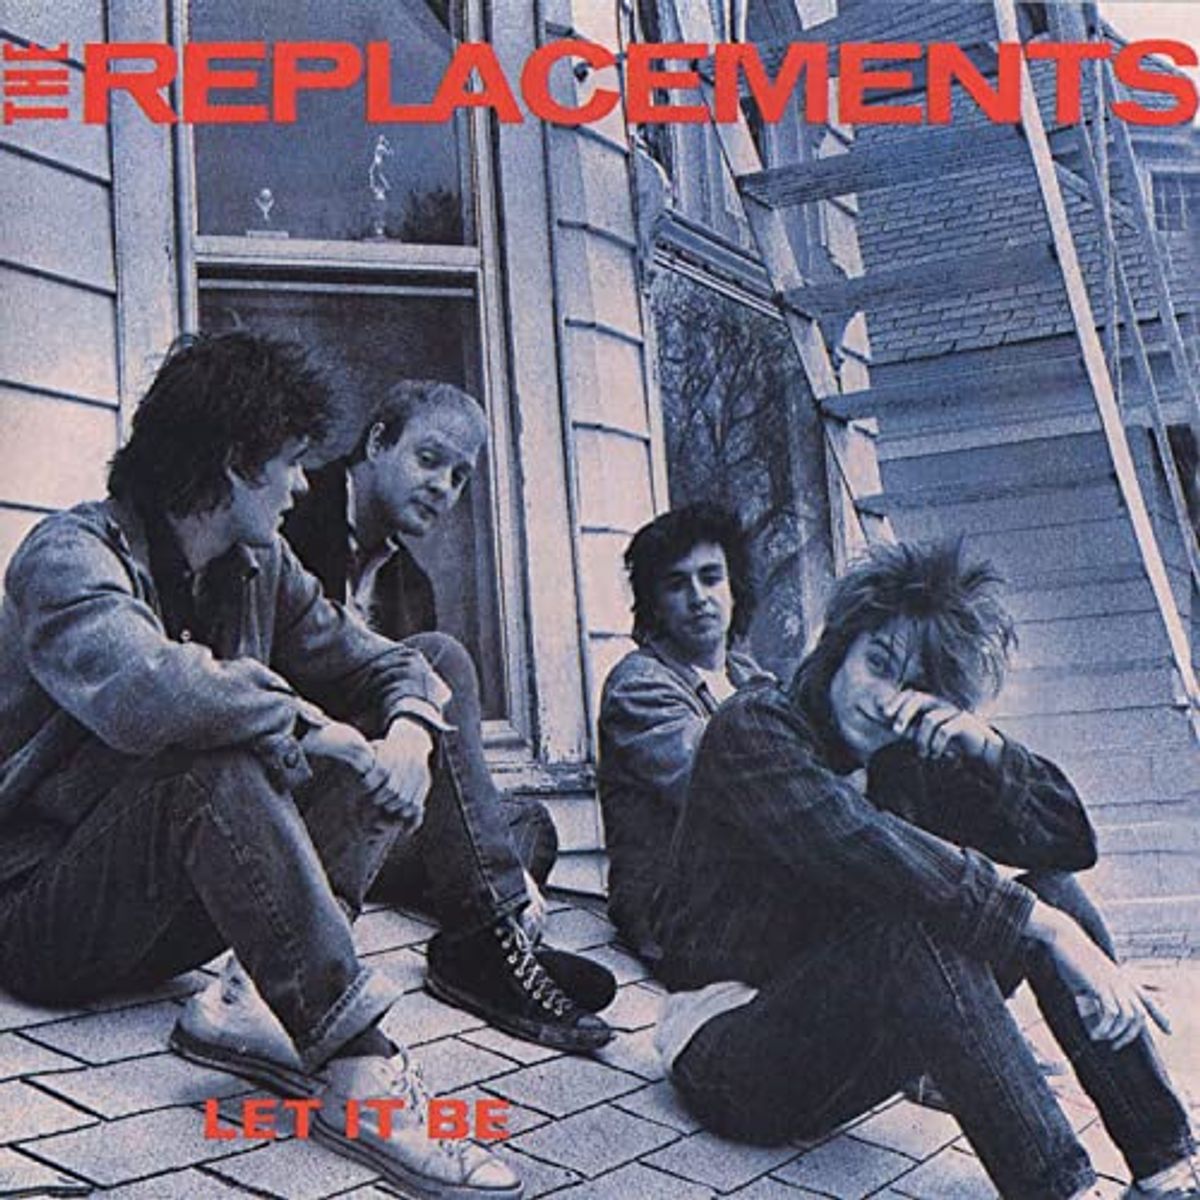 #ETPhoneHome - The Replacements - Answering Machine (1984)